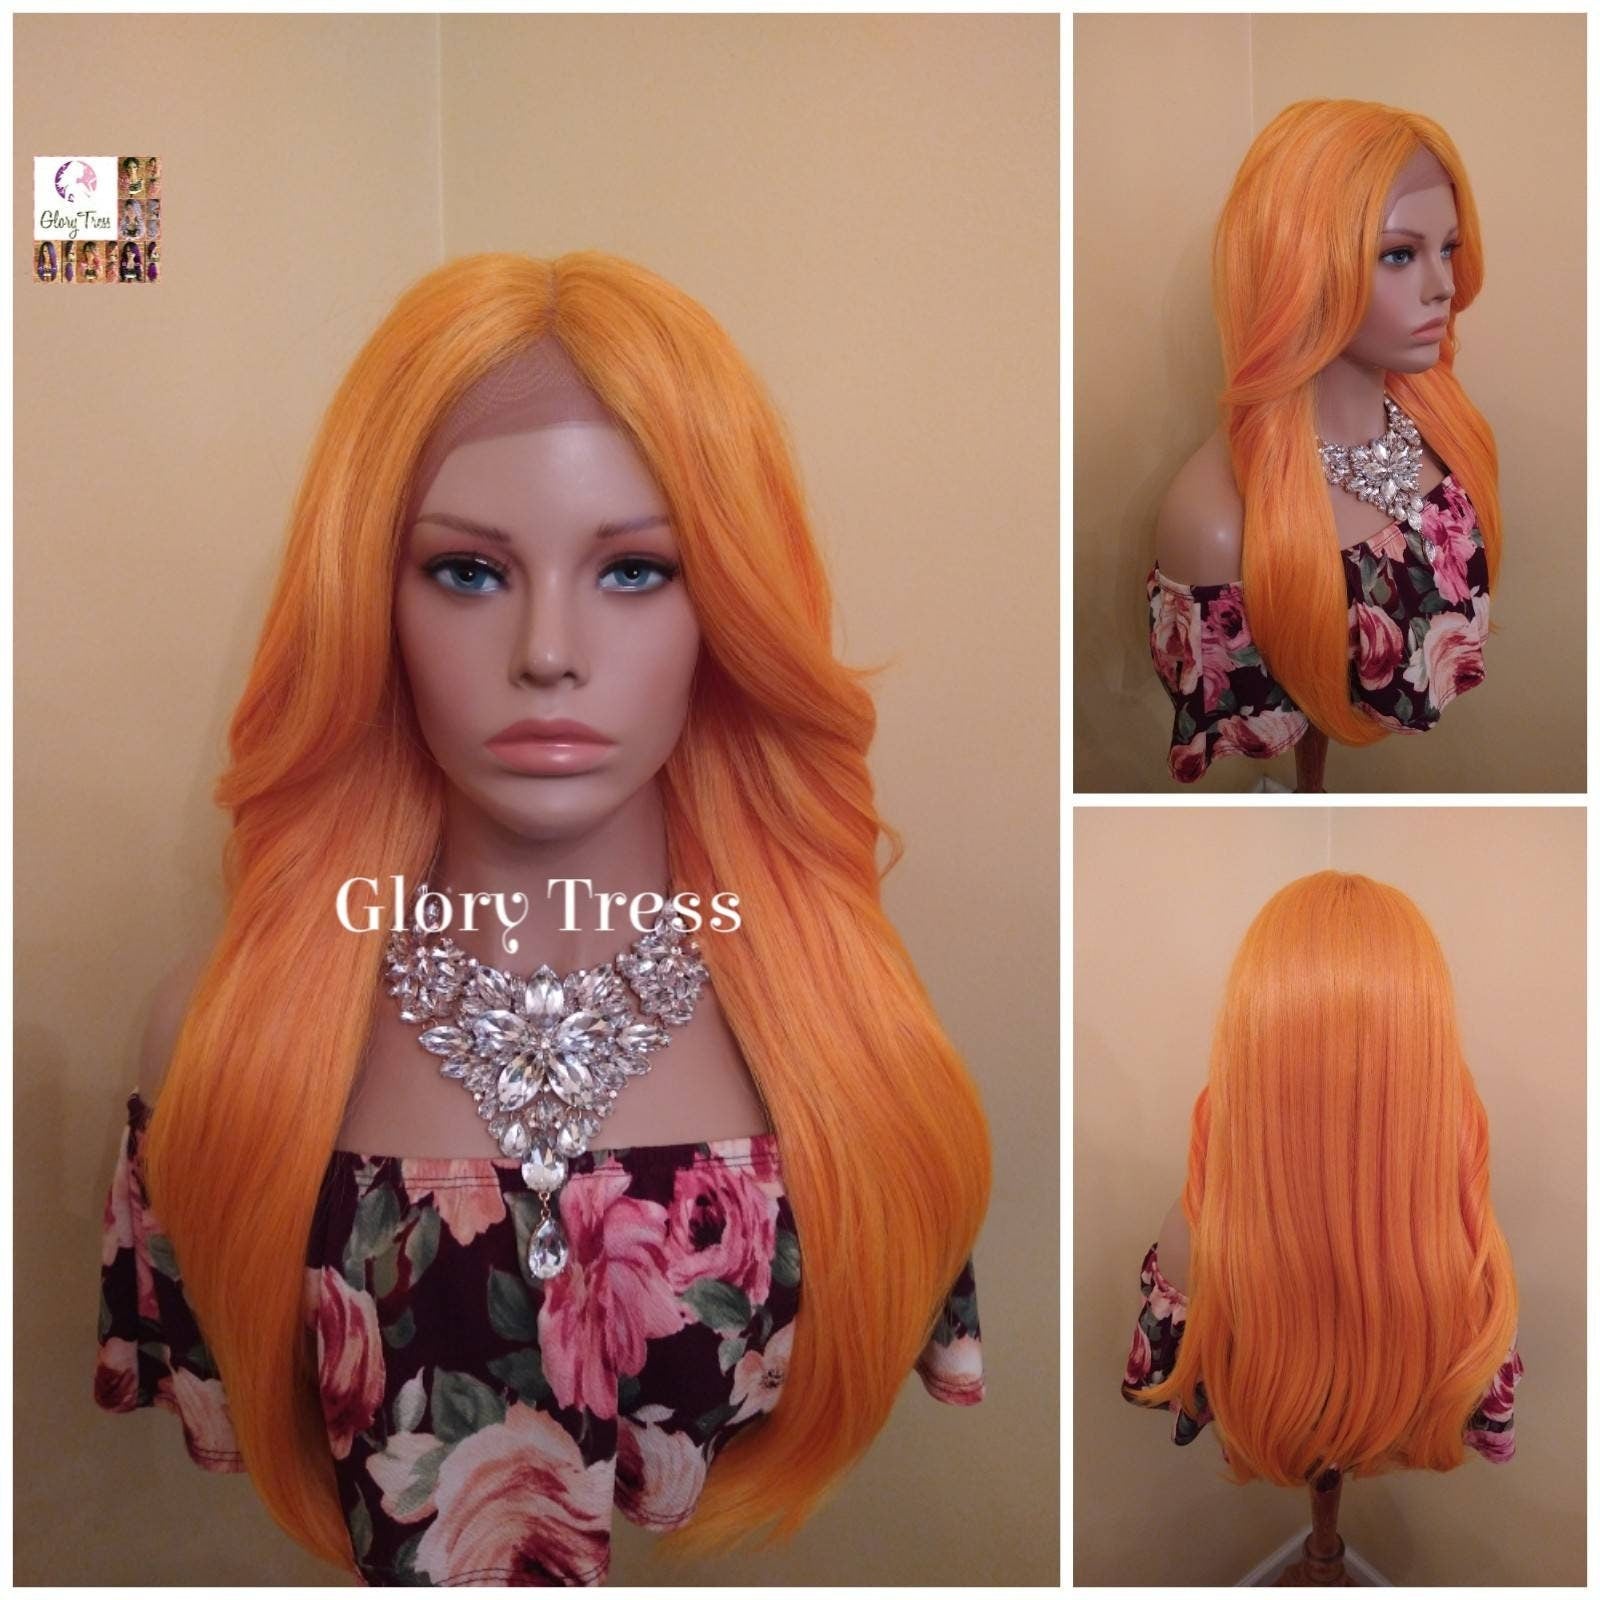 Lace Front Wig, Orange Wig, Long Loose Curly, Yaki Texture, Glory Tress Wig, ON SALE // GLADNESS